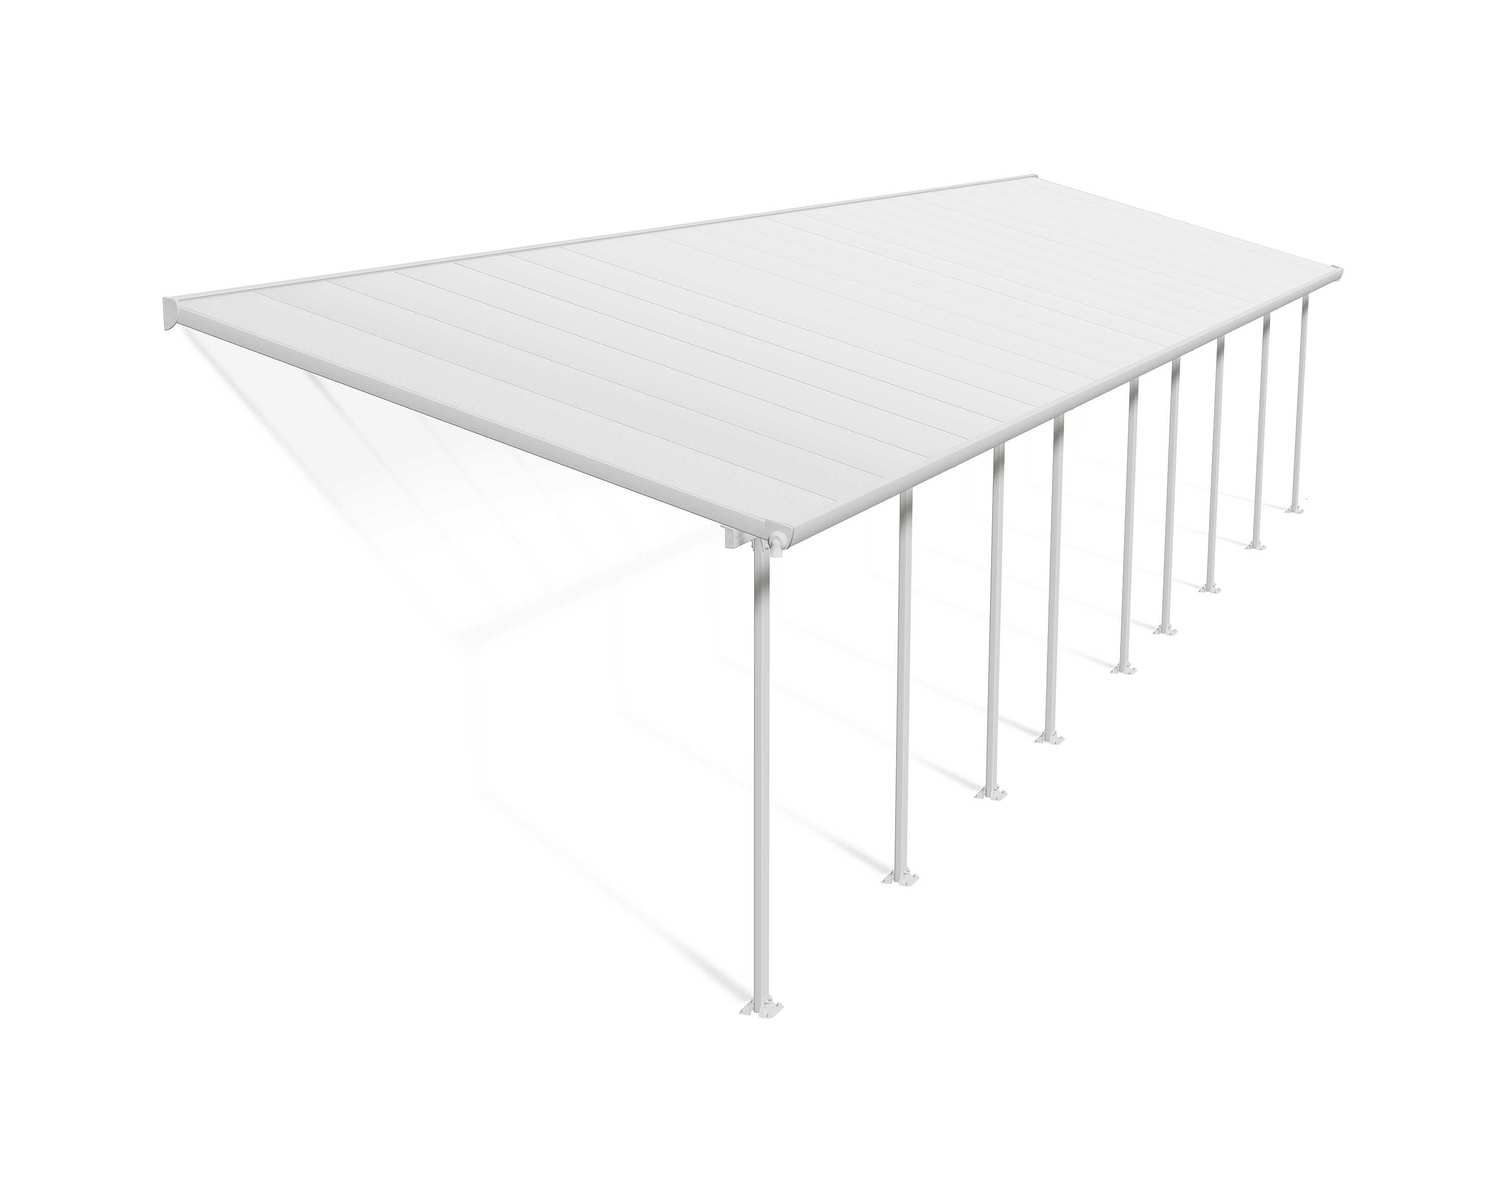 Patio Cover Kit Feria 3 ft. x 13.40 ft. White Structure &amp; White Multi Wall Glazing